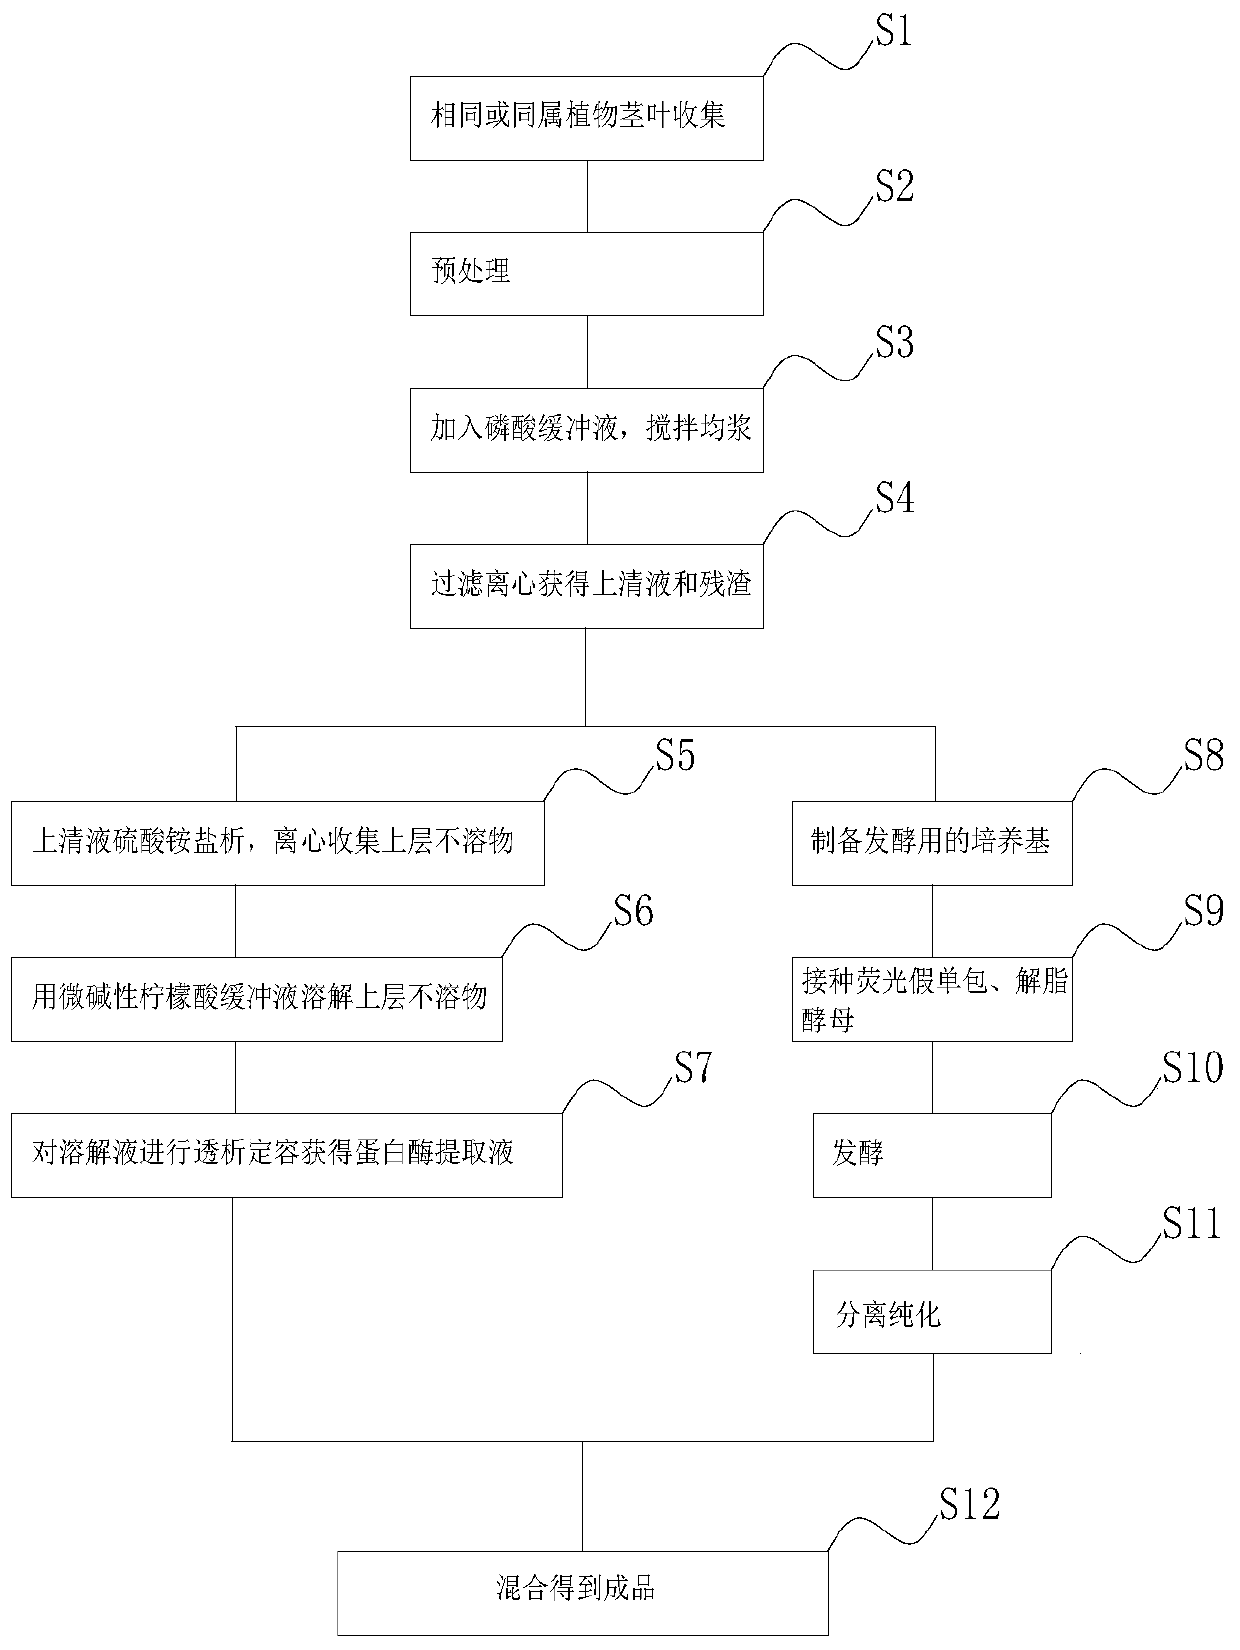 Method for producing protease for promoting growth of plant roots and fruits